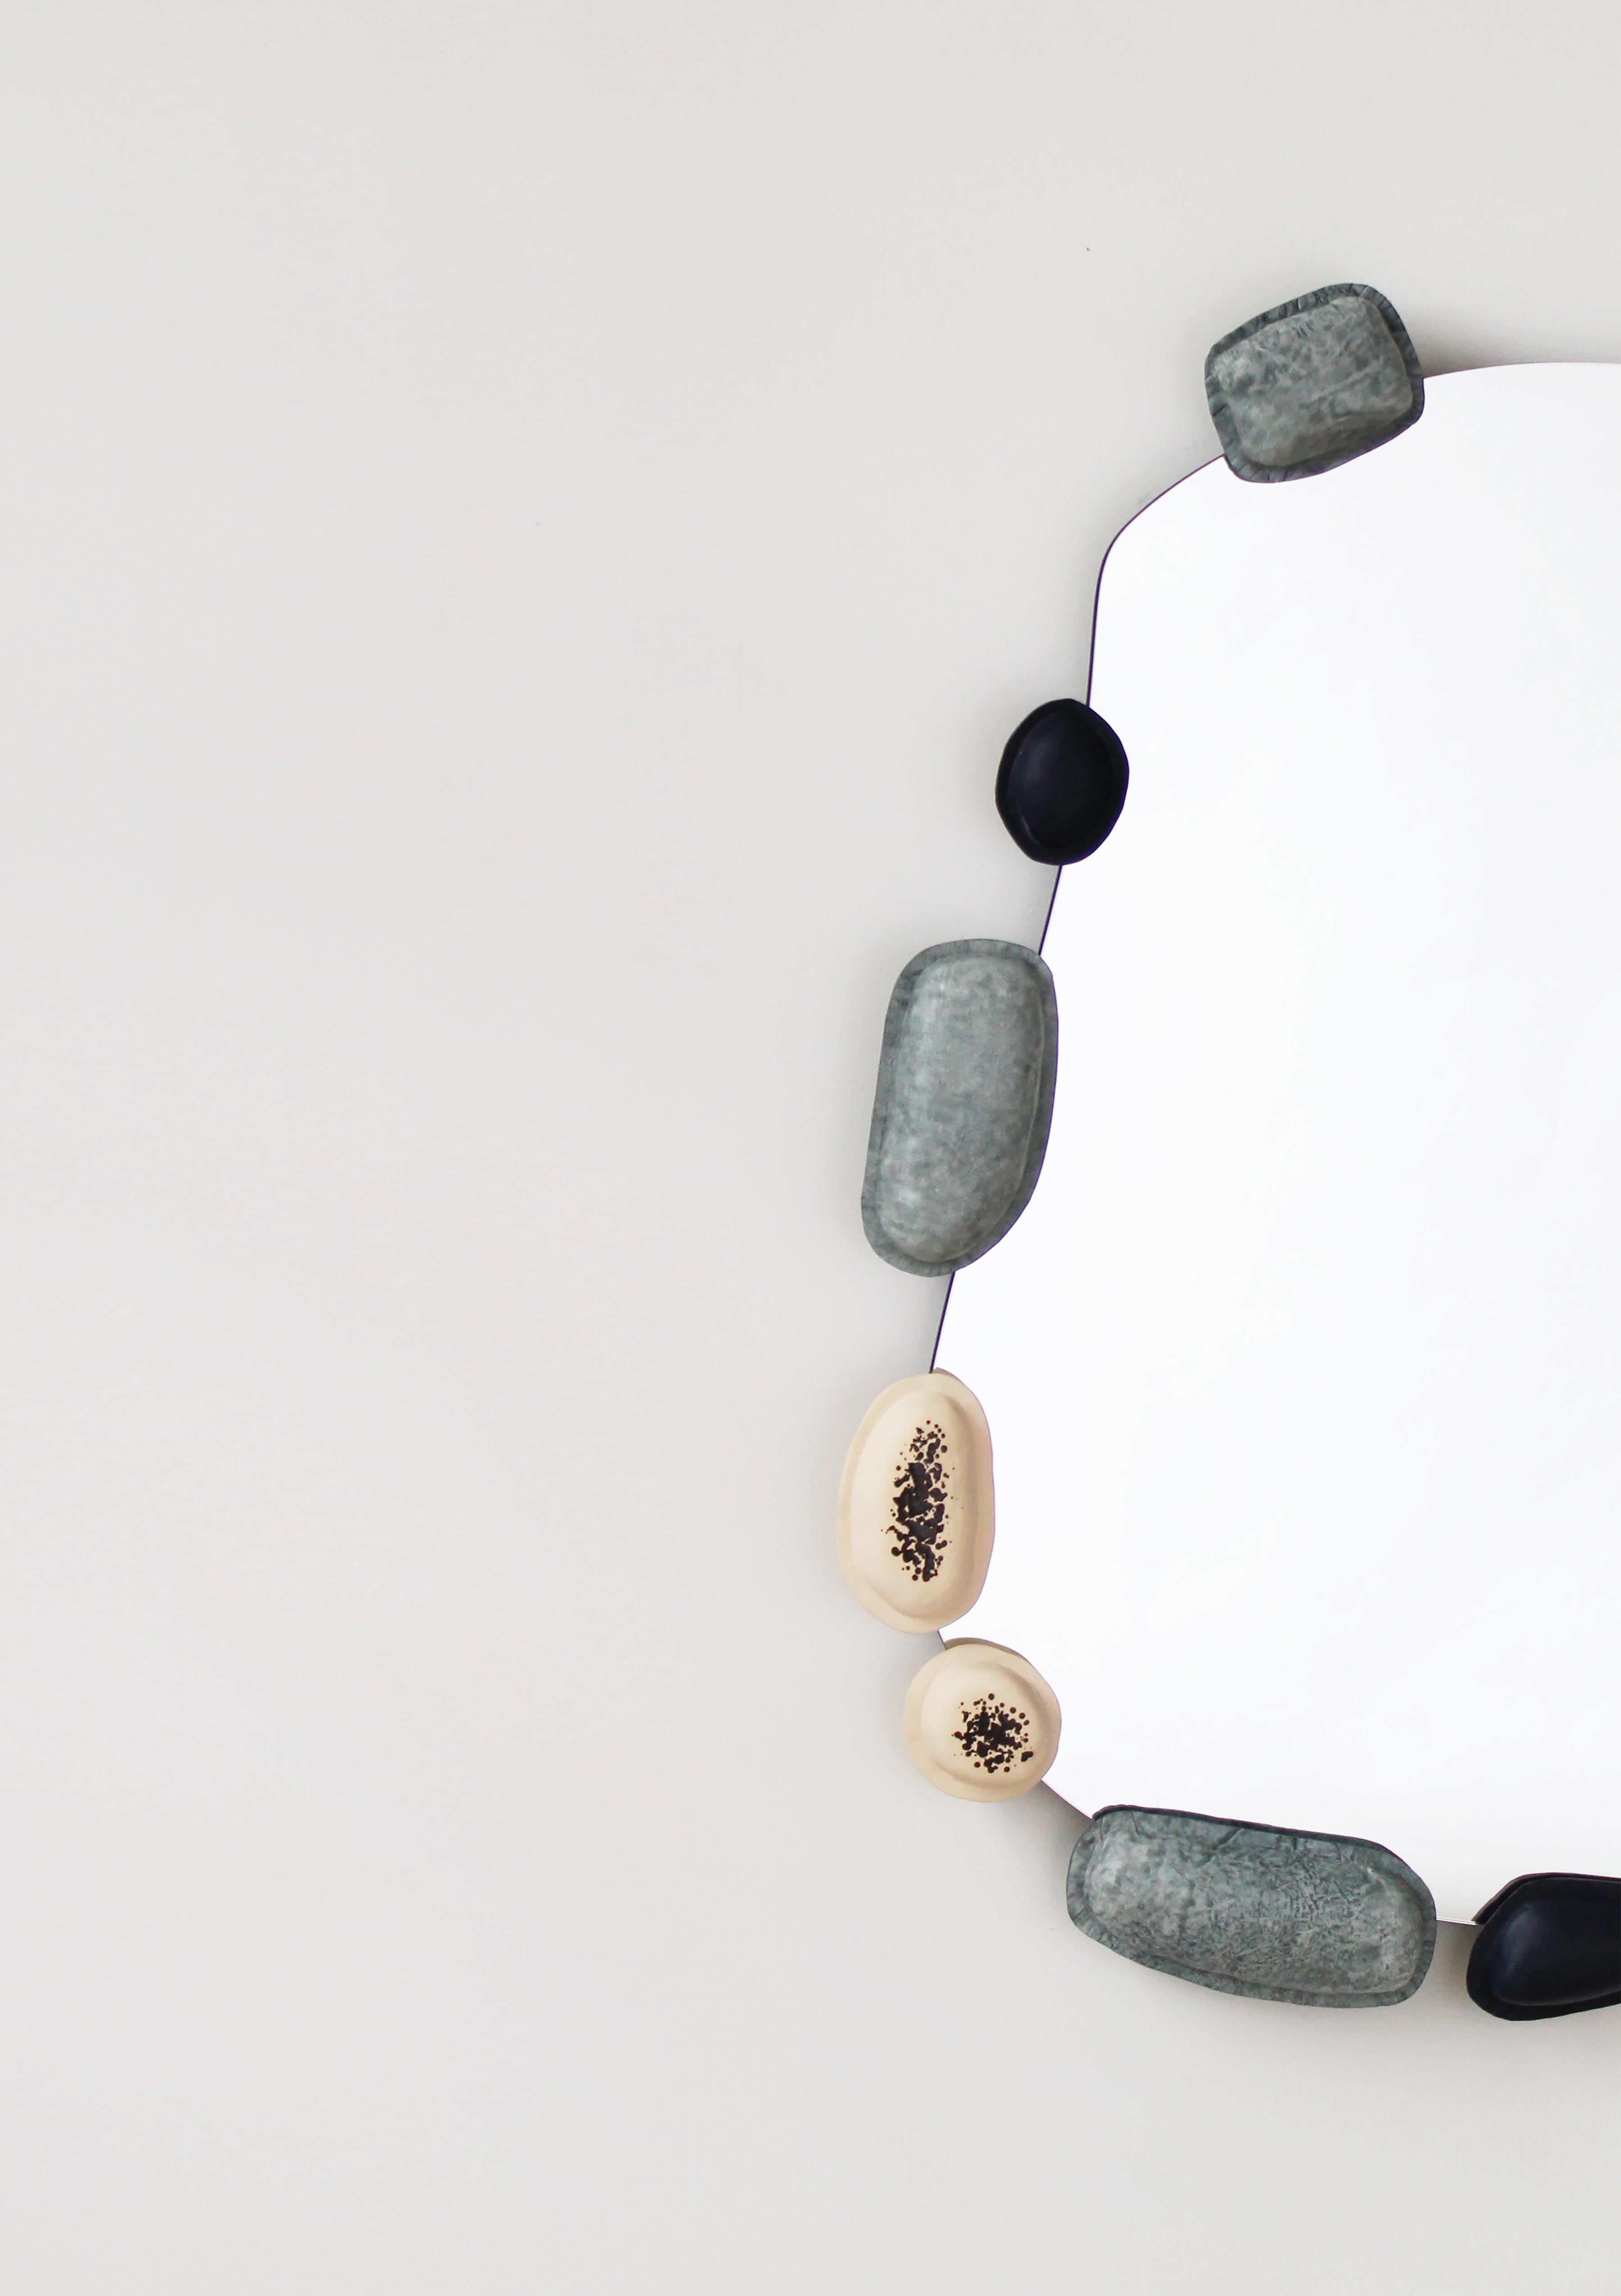 Organic mirror with painted plywood backing. Ceramic, oversized leather formed beads around the mirror.